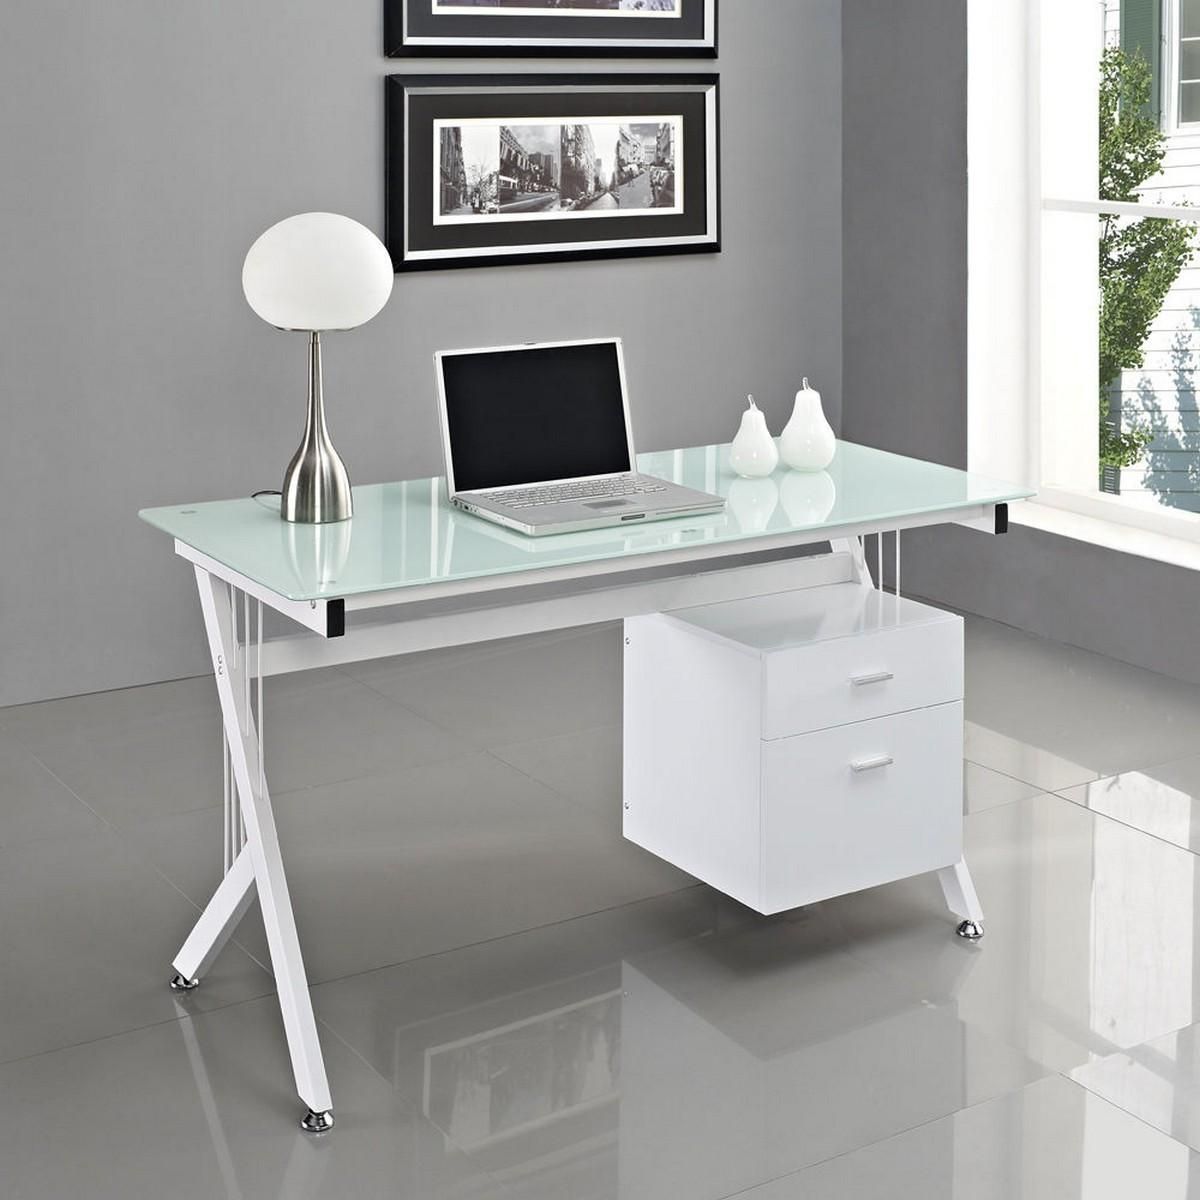 White Computer Desk Suits Your Home Office Furniture – Decoratorist Throughout White Glass And Natural Wood Office Desks (View 2 of 15)